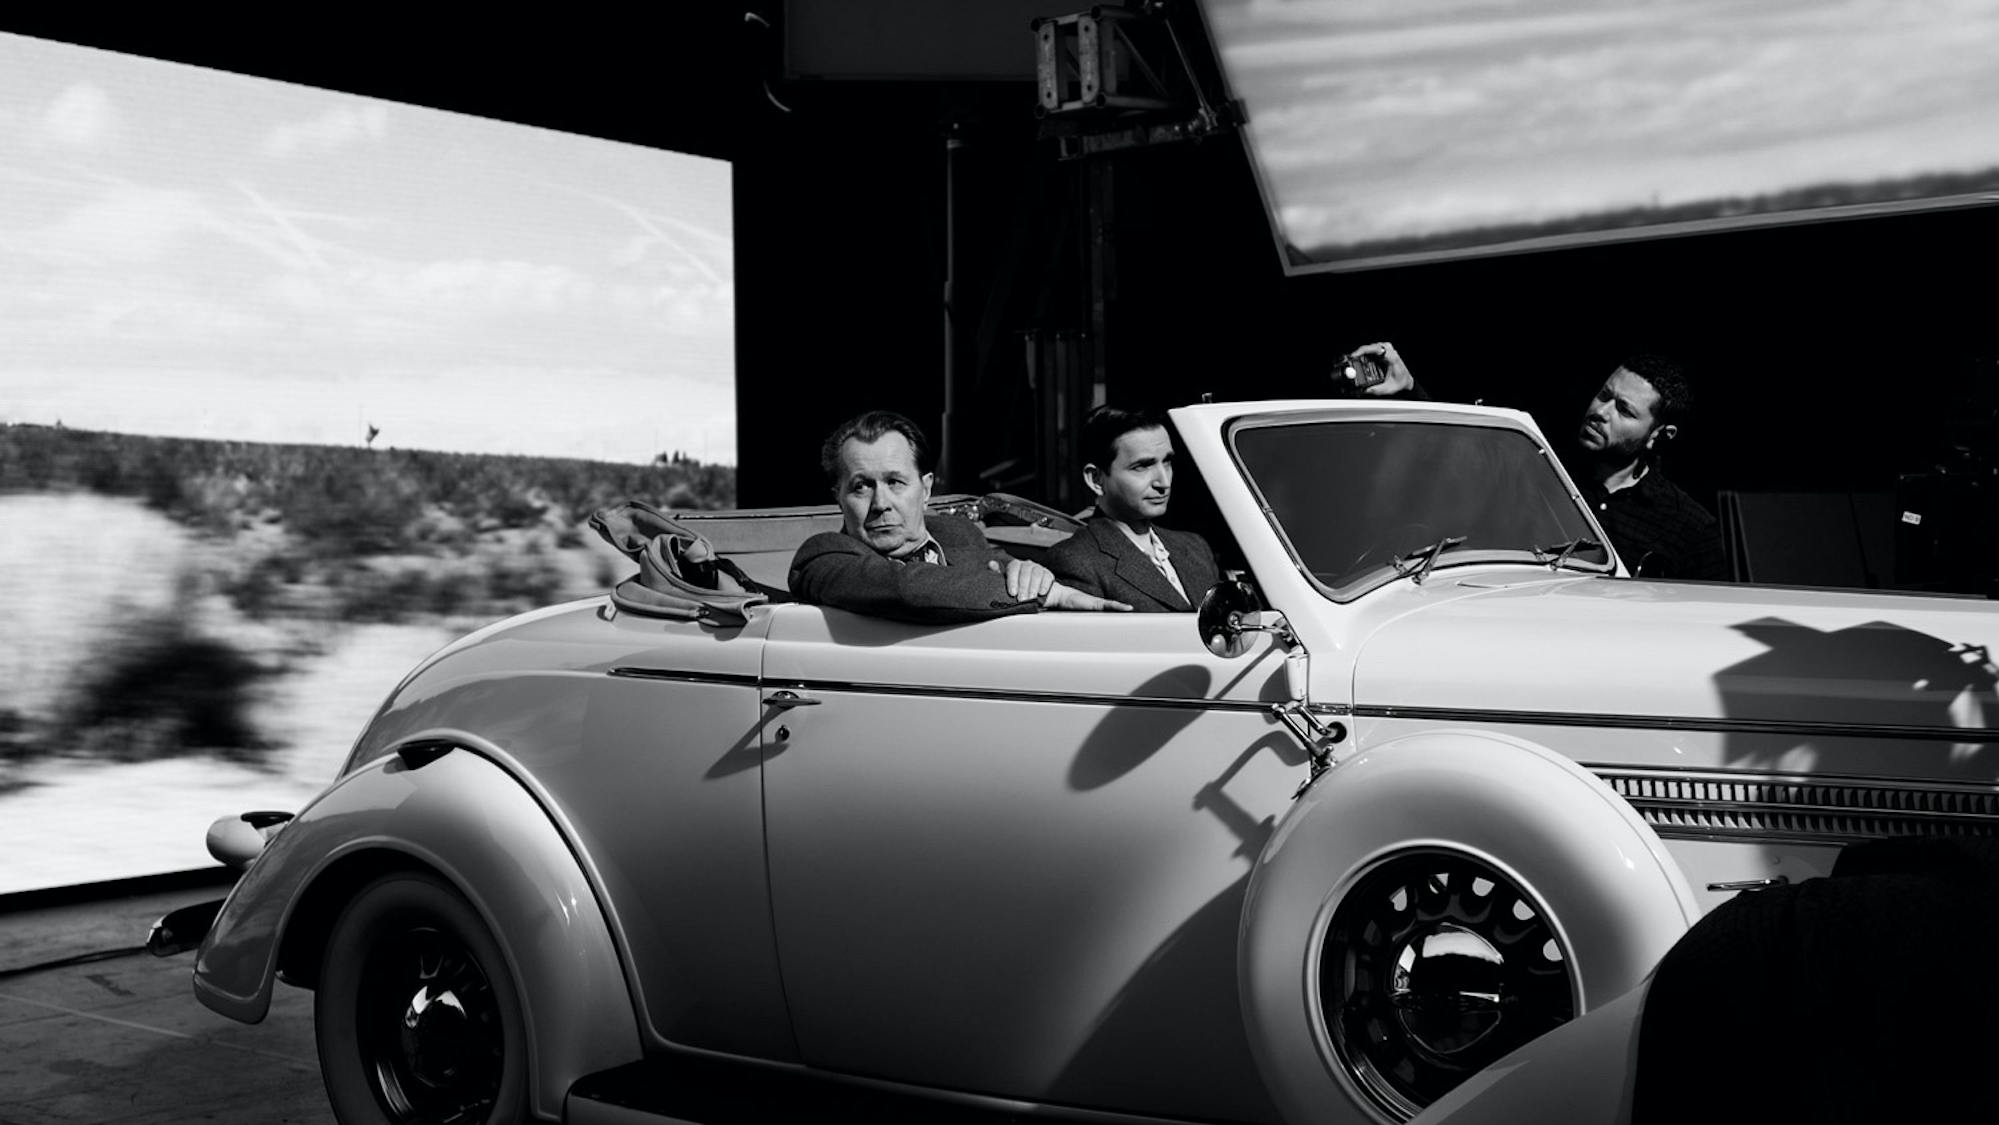 Oldman and Persaud pictured in an open-top automobile with footage of California scenery rolling by on screens around them.